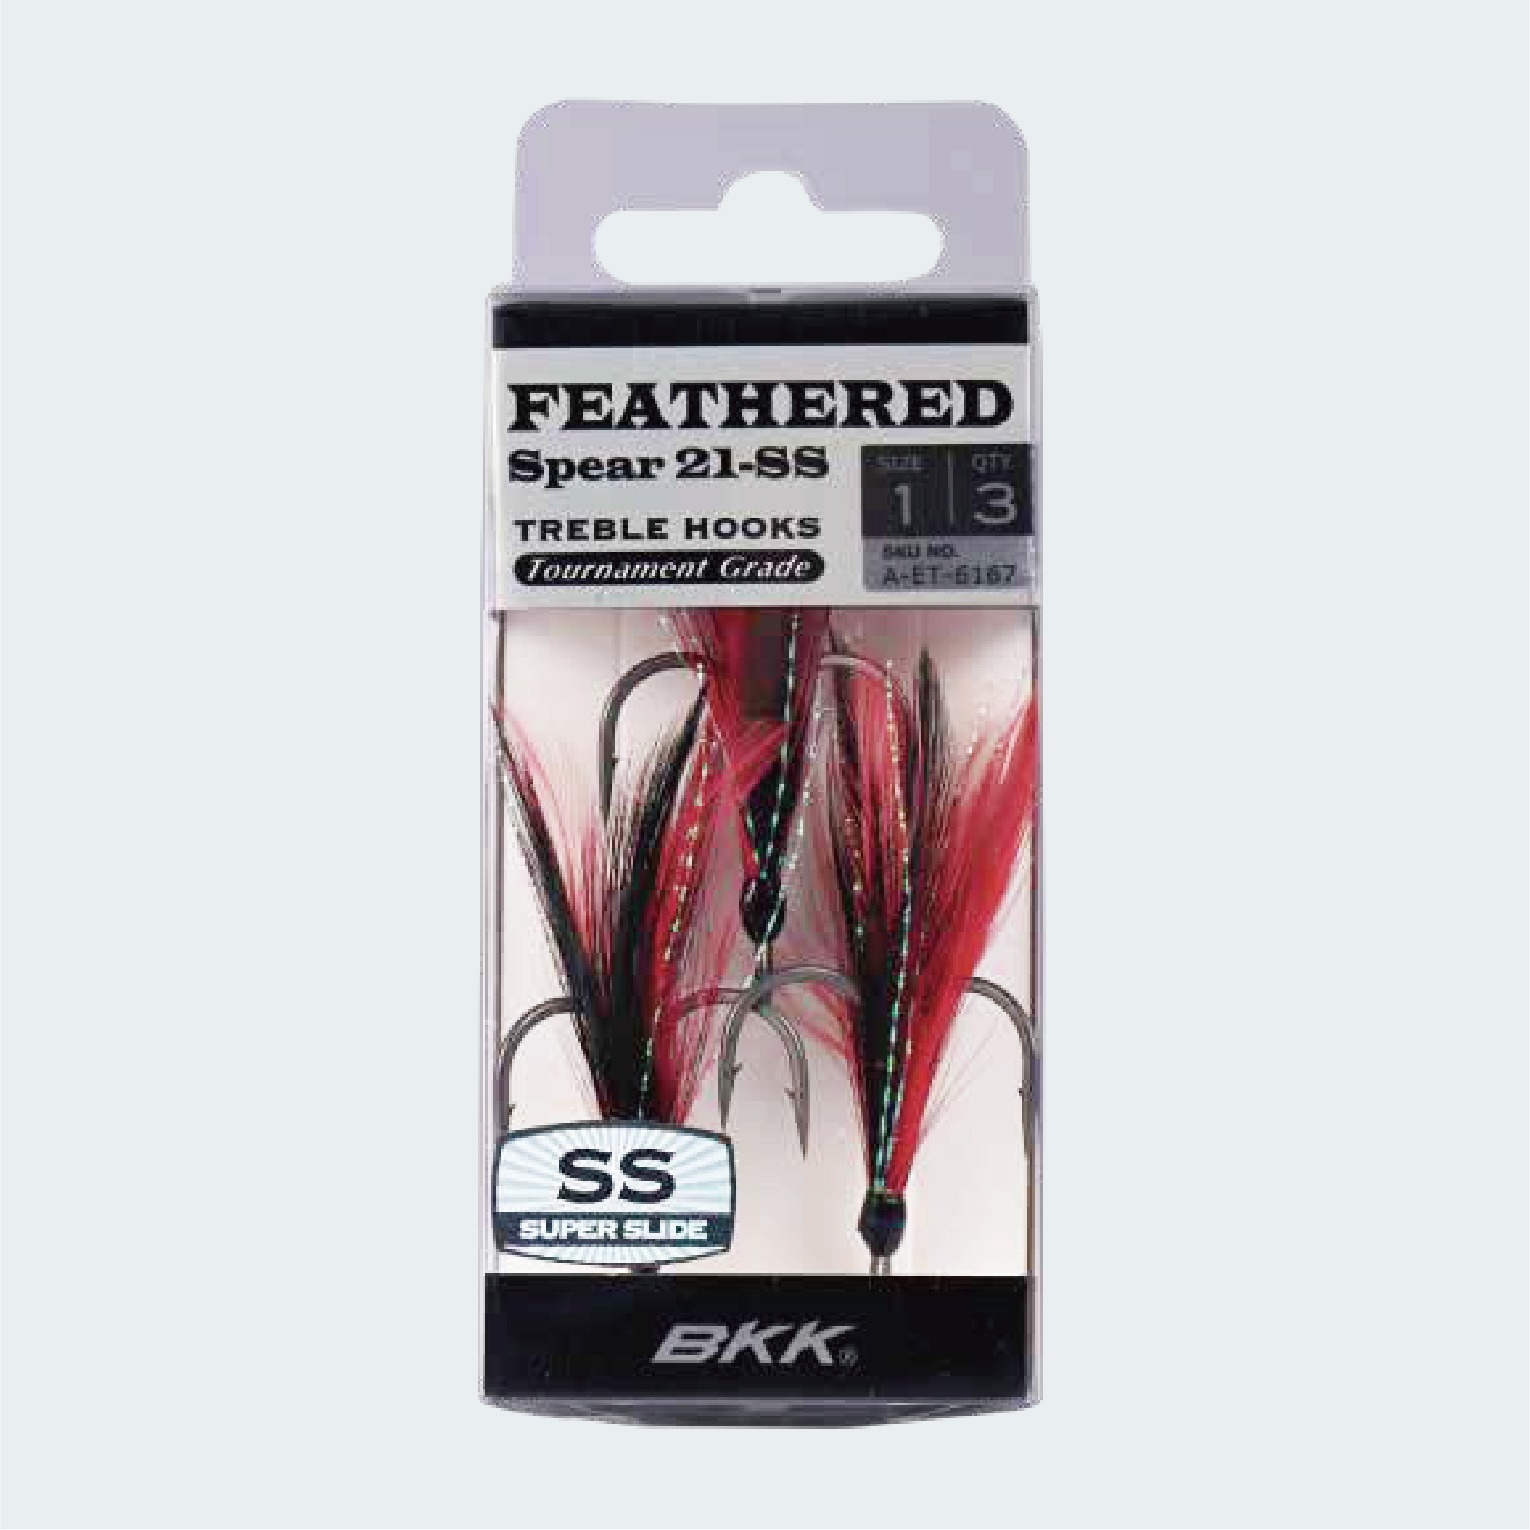 Ancoretta BKK Feathered Spear 21 SS col. Red-Black